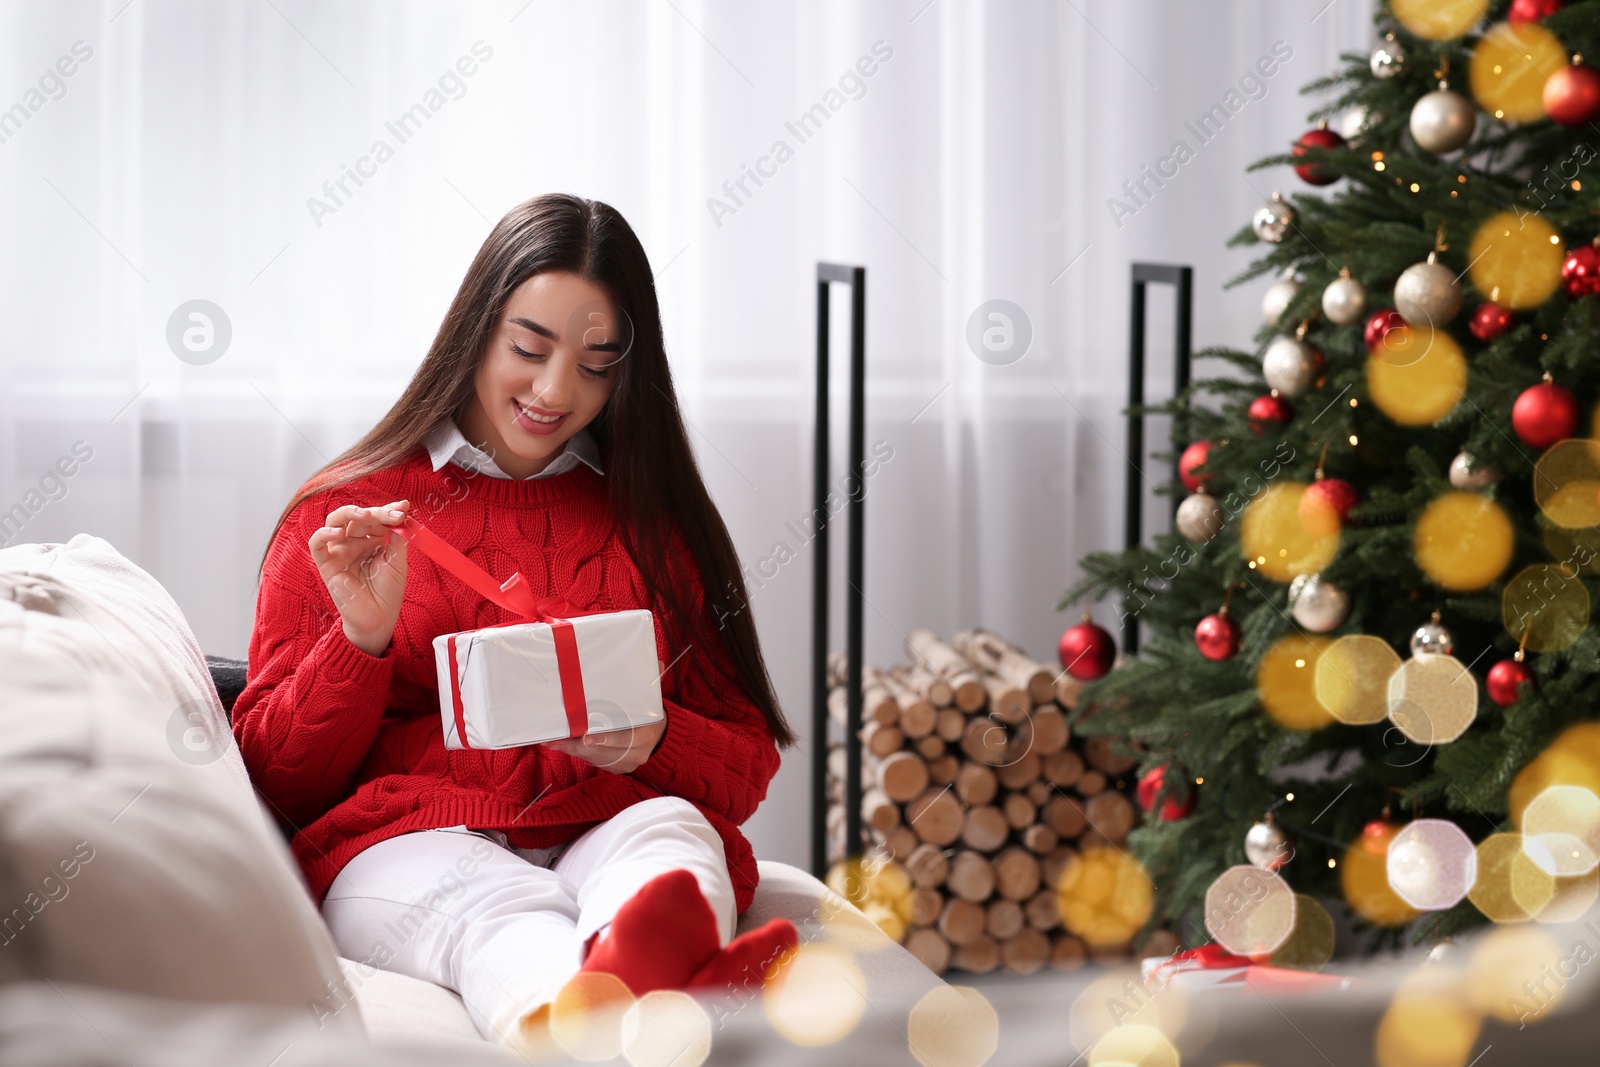 Photo of Smiling woman opening gift near Christmas tree indoors